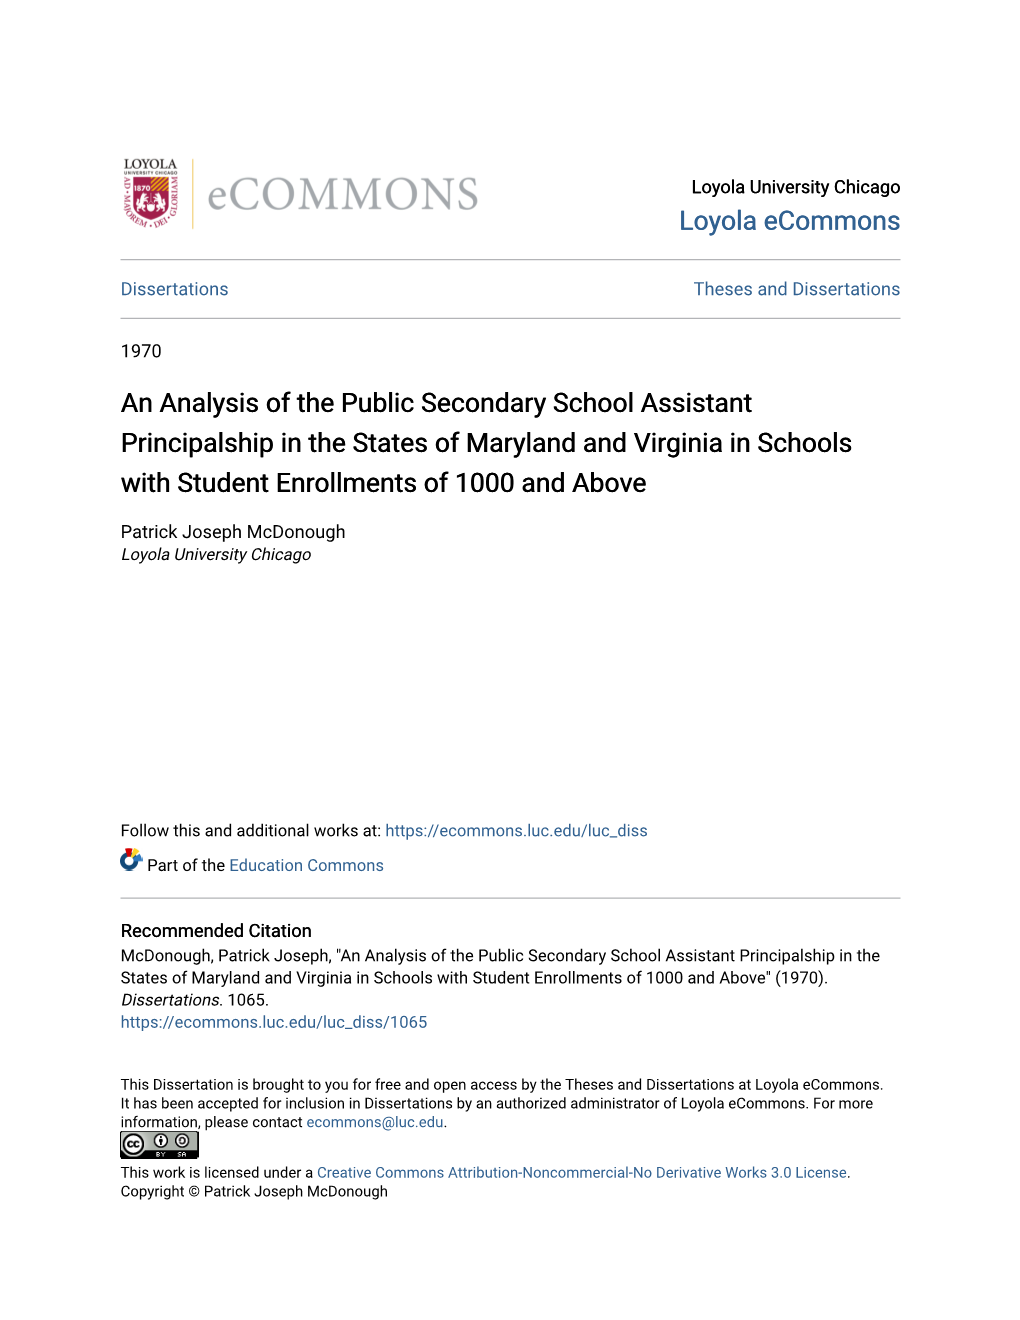 An Analysis of the Public Secondary School Assistant Principalship in the States of Maryland and Virginia in Schools with Student Enrollments of 1000 and Above